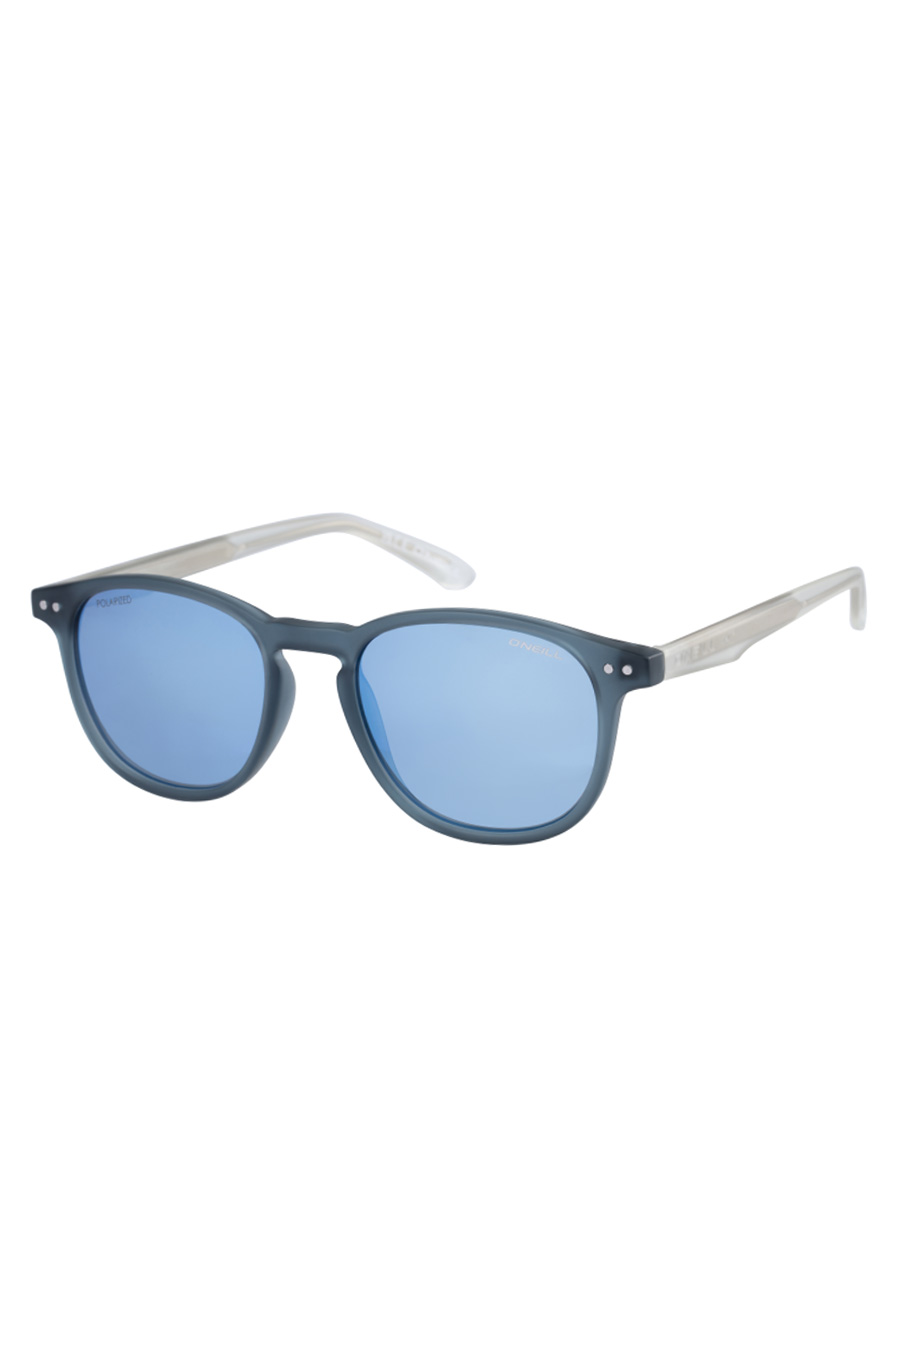 Saulesbrilles ONEILL ONS-9008-20-105P